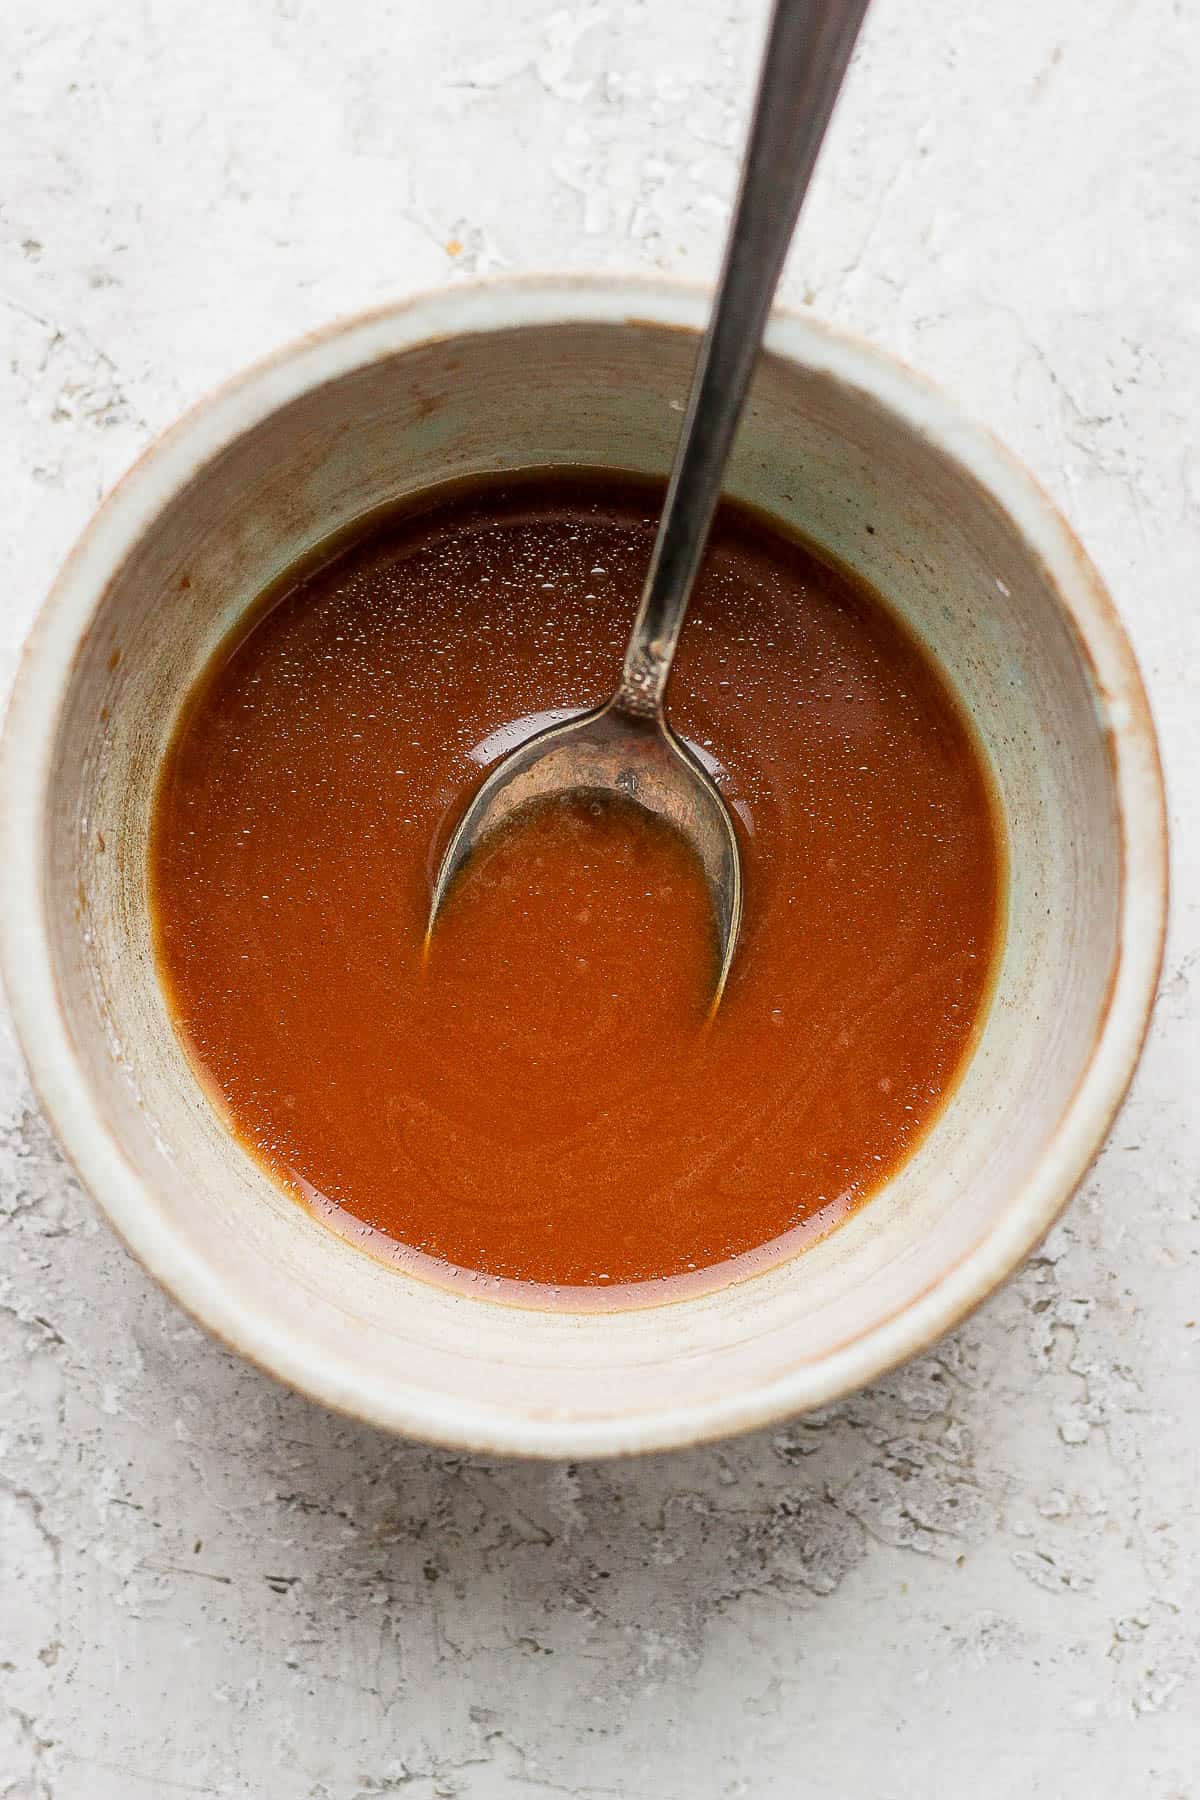 Kung Pao sauce in a small bowl with a spoon.